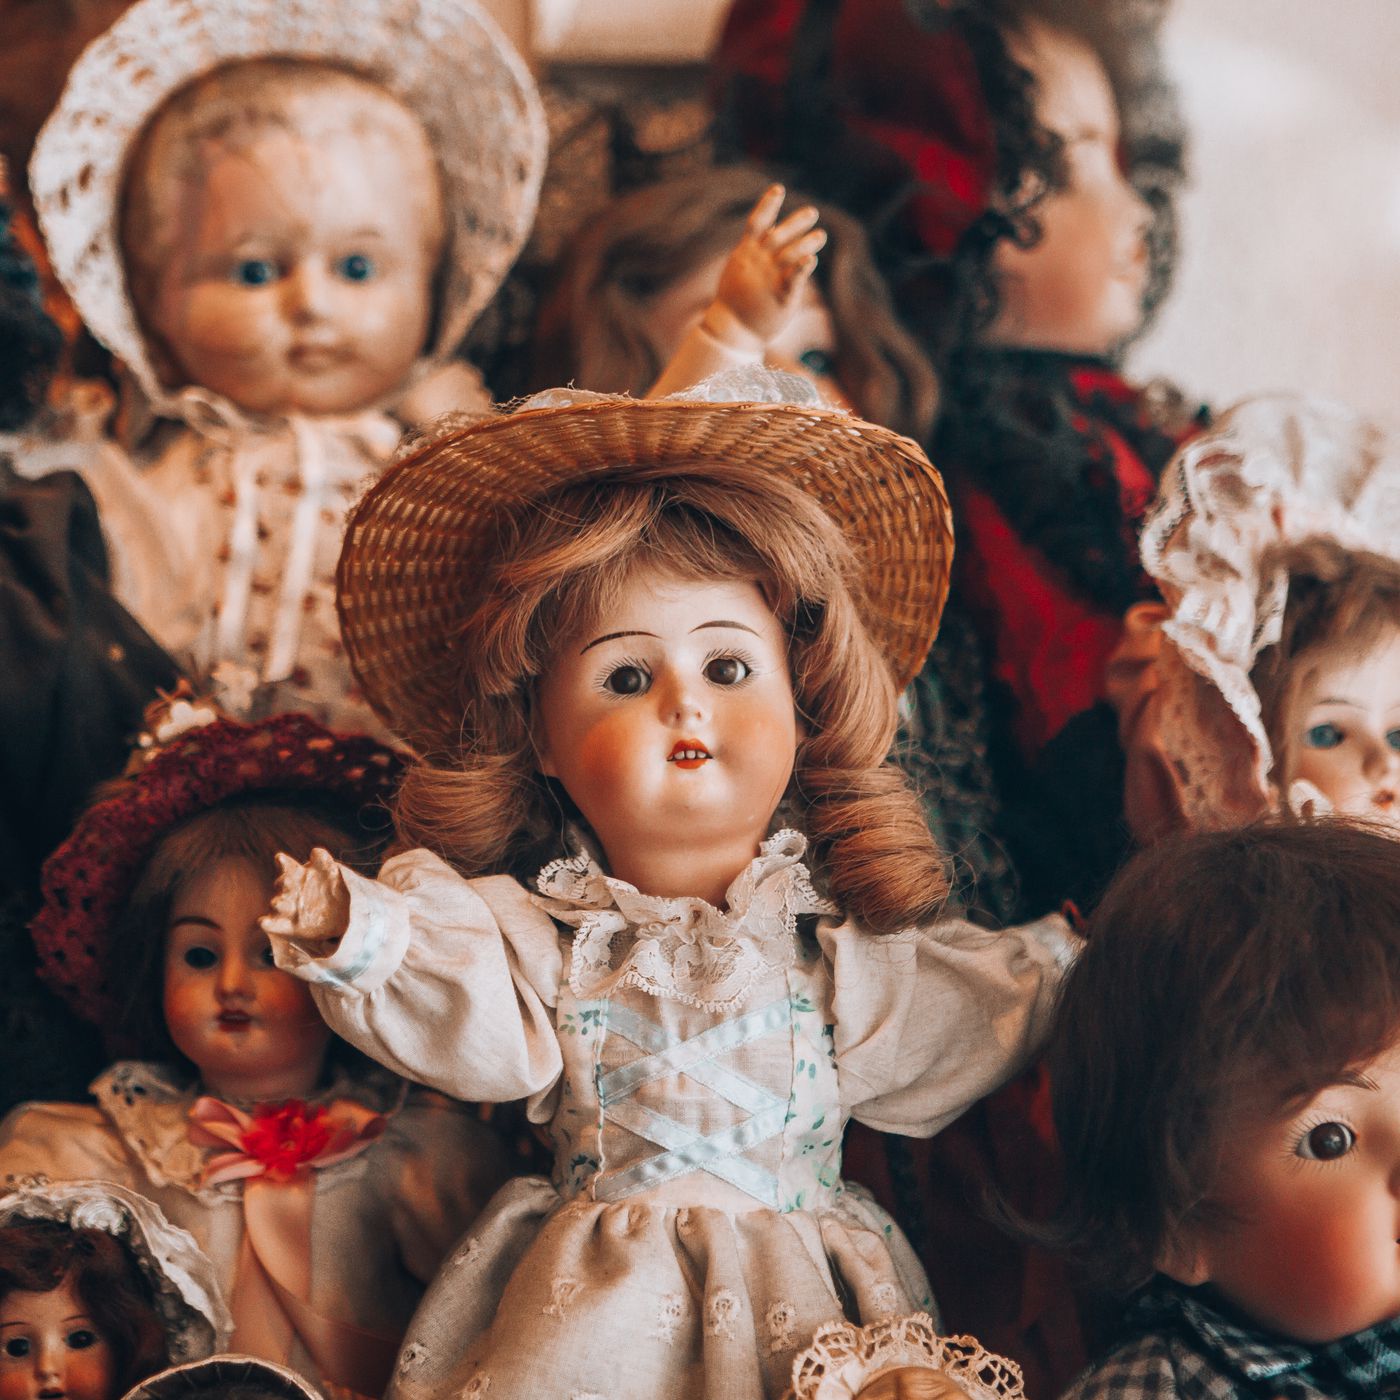 Horror movies love a haunted doll. So do collectors